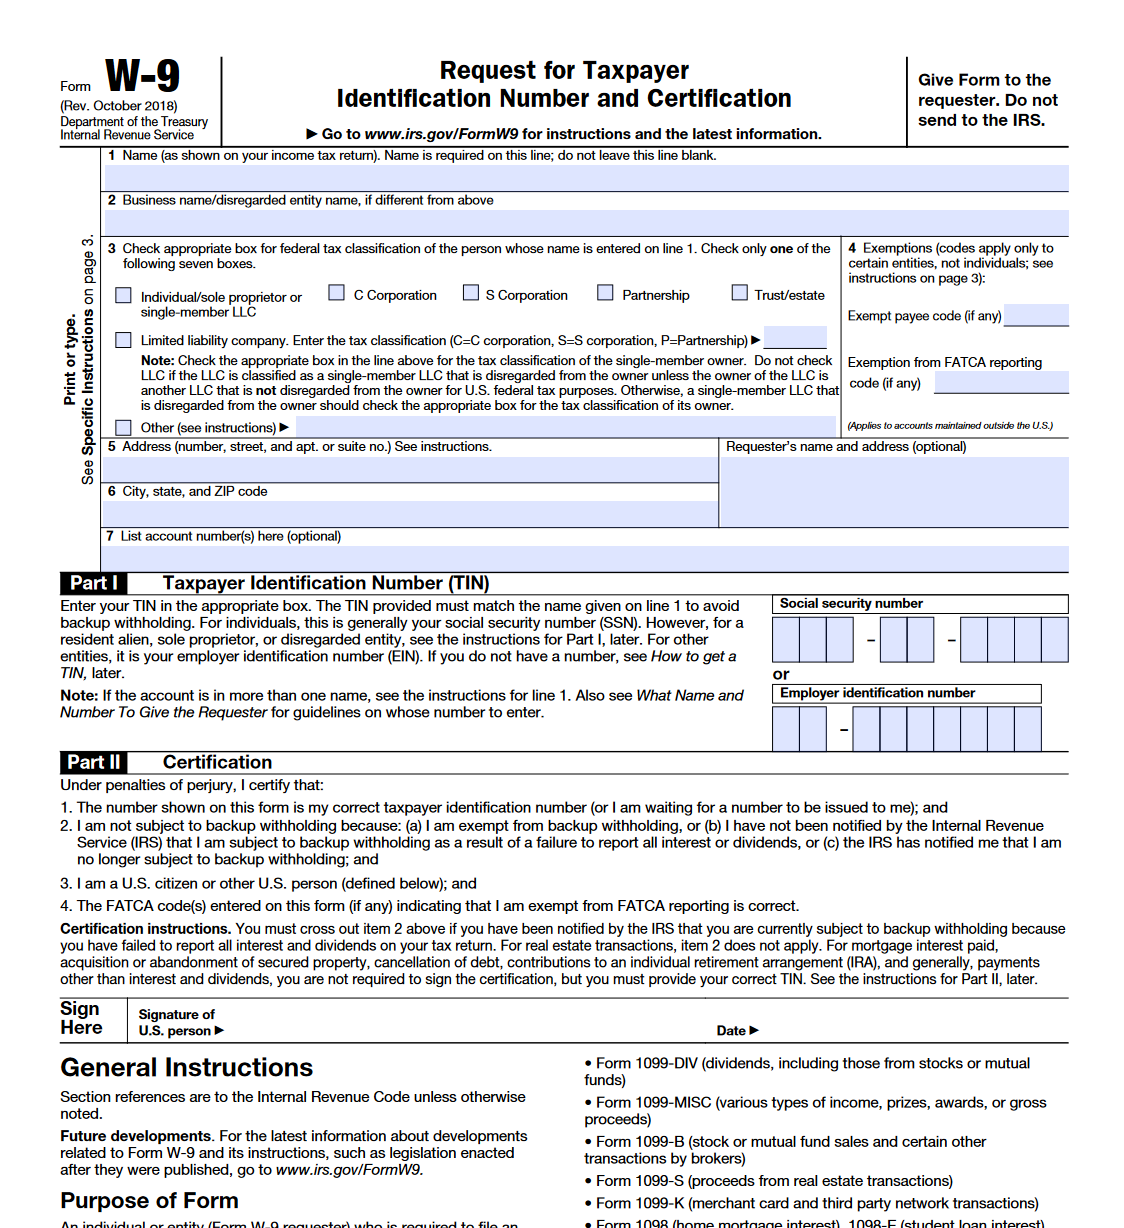 IRS Form W9. Request for Taxpayer Identification Number and